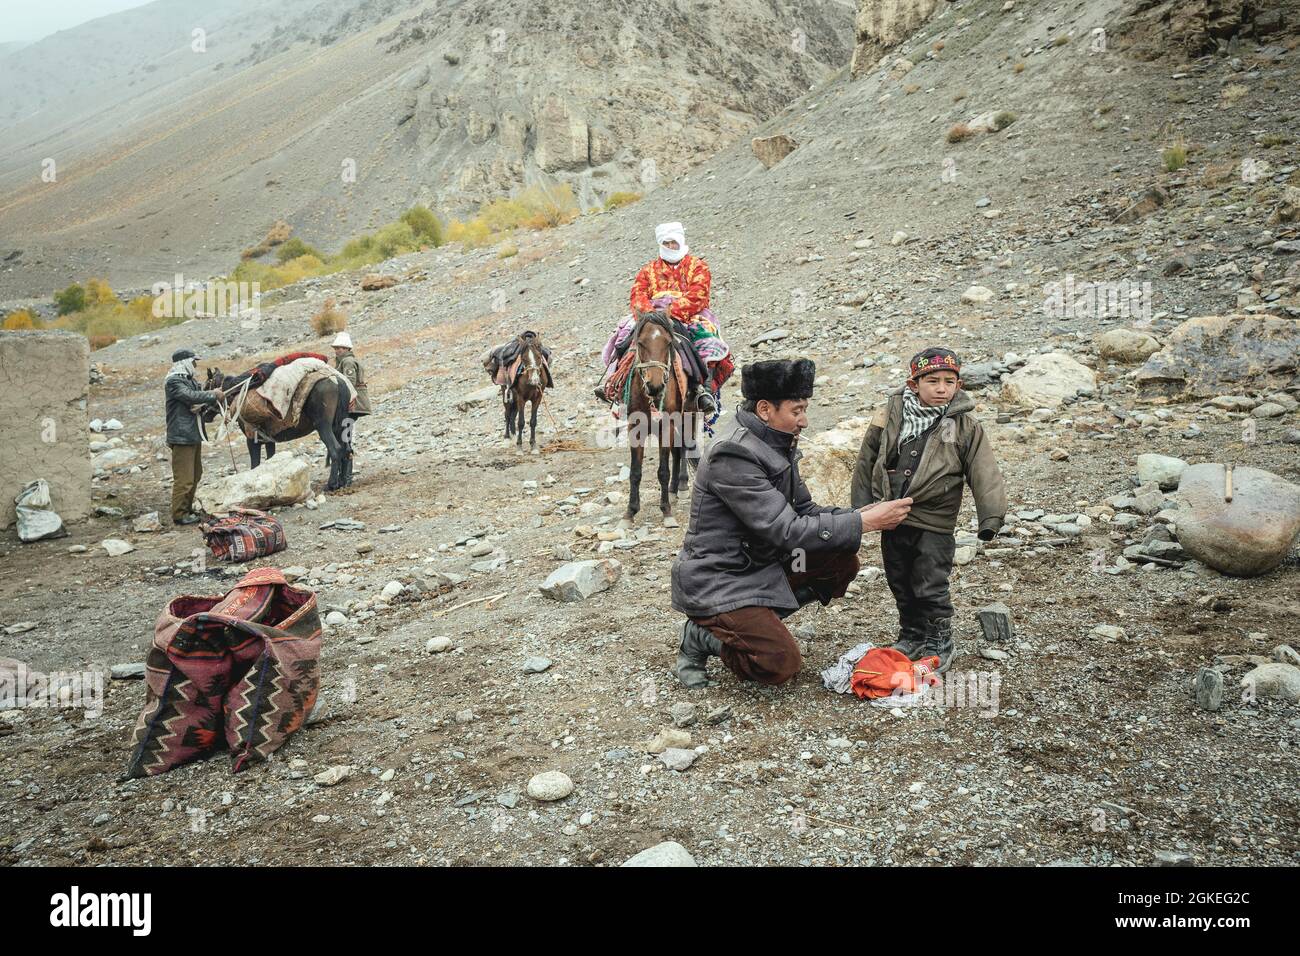 A man puts on a jacket for his son, a horse is loaded in the background, a woman sits on a horse, Kyrgyz nomads on their way to the hospital of Stock Photo